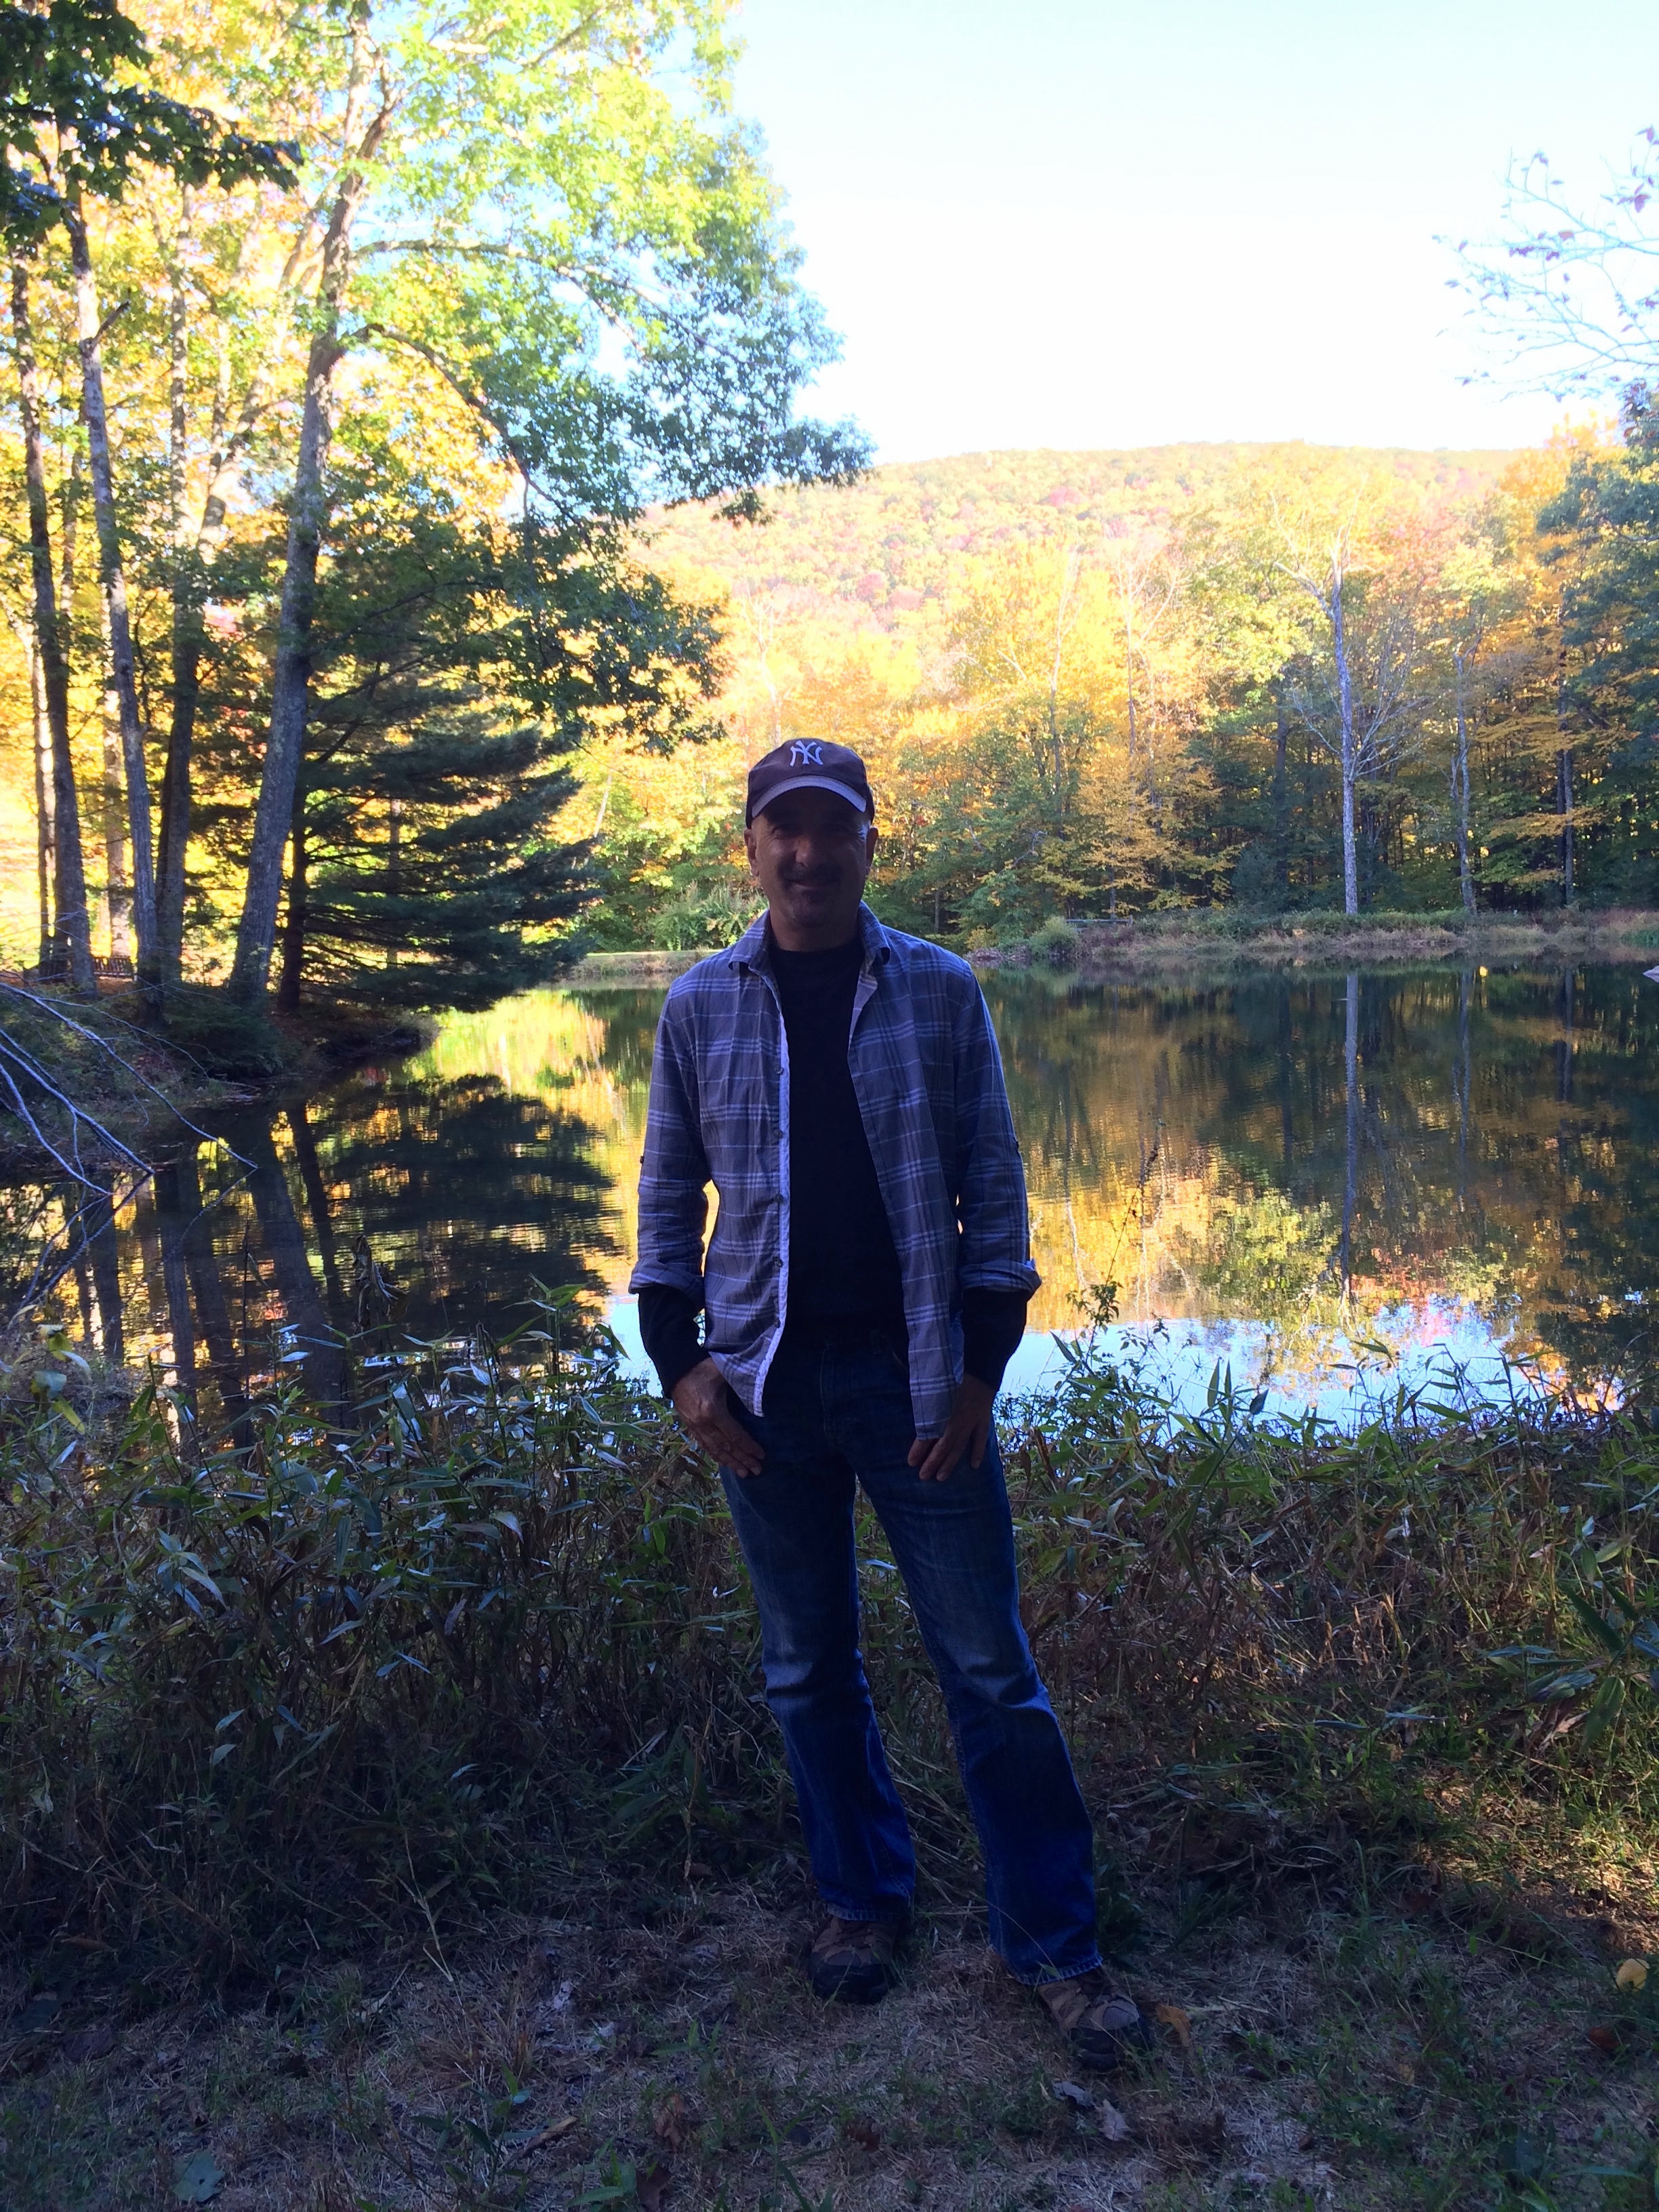 me at the pond Oct 2015.jpg